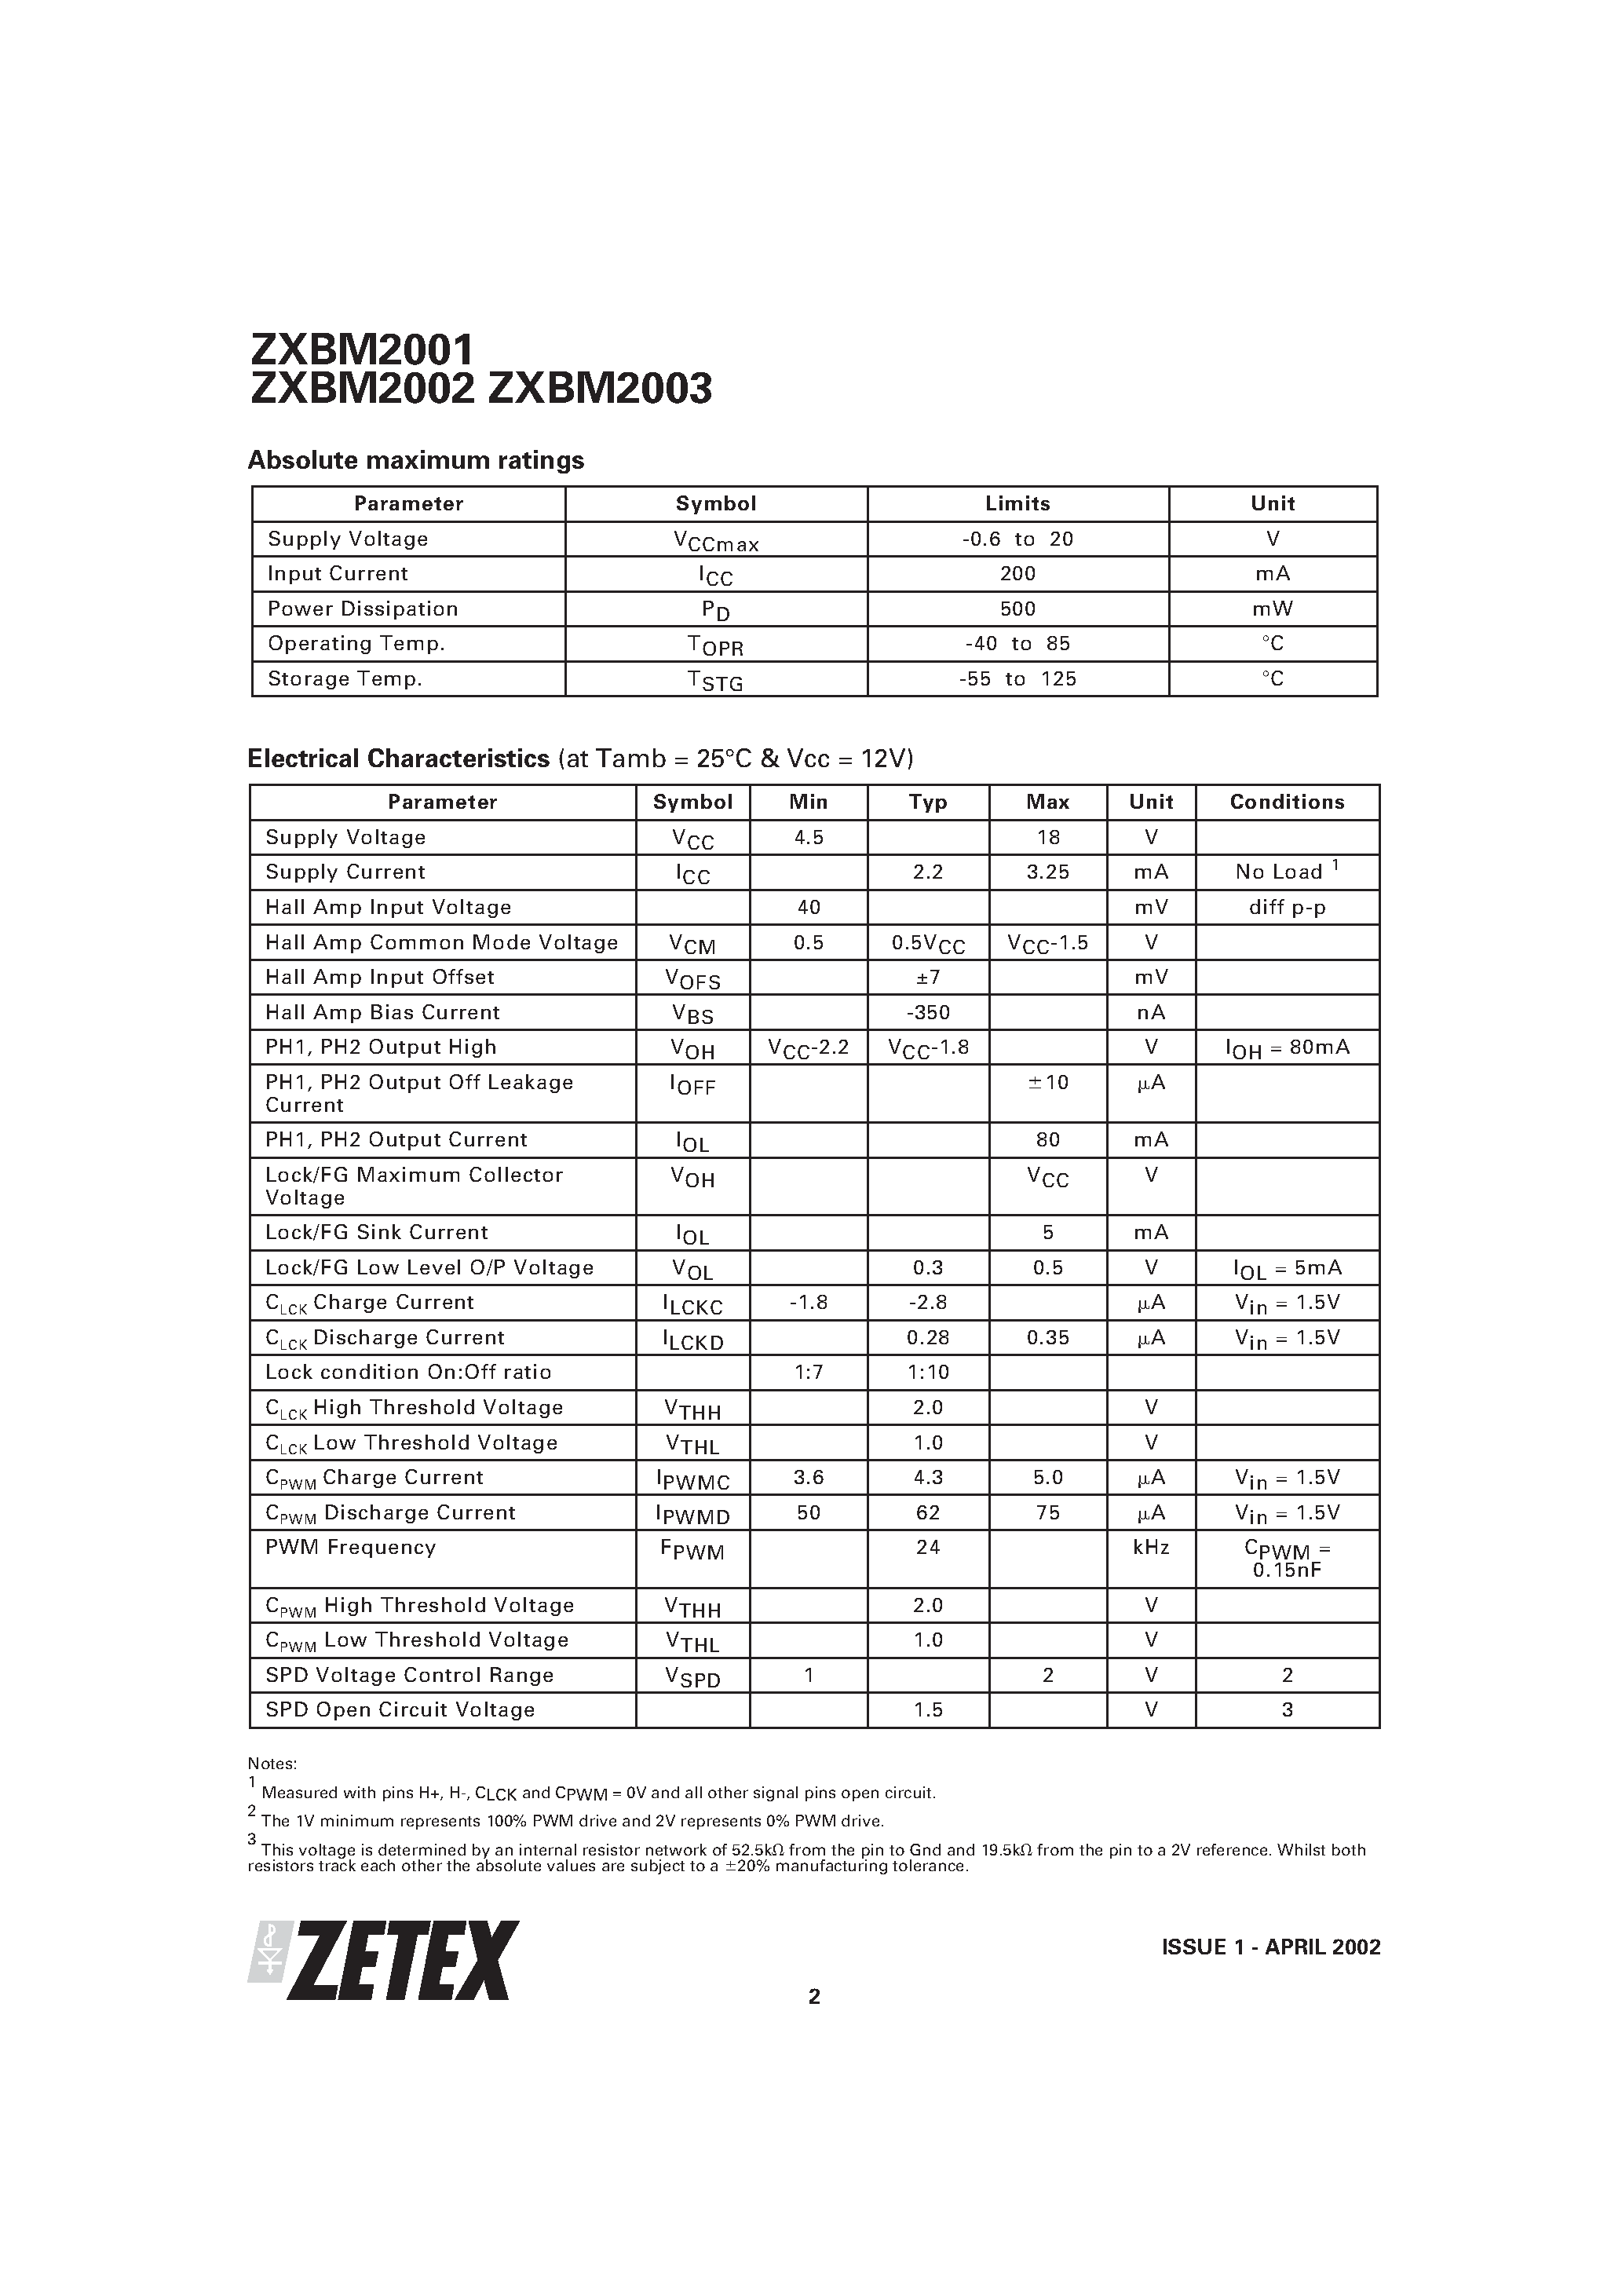 Datasheet ZXBM2003 - VARIABLE SPEED 2-PHASE FAN MOTOR CONTROLLER page 2